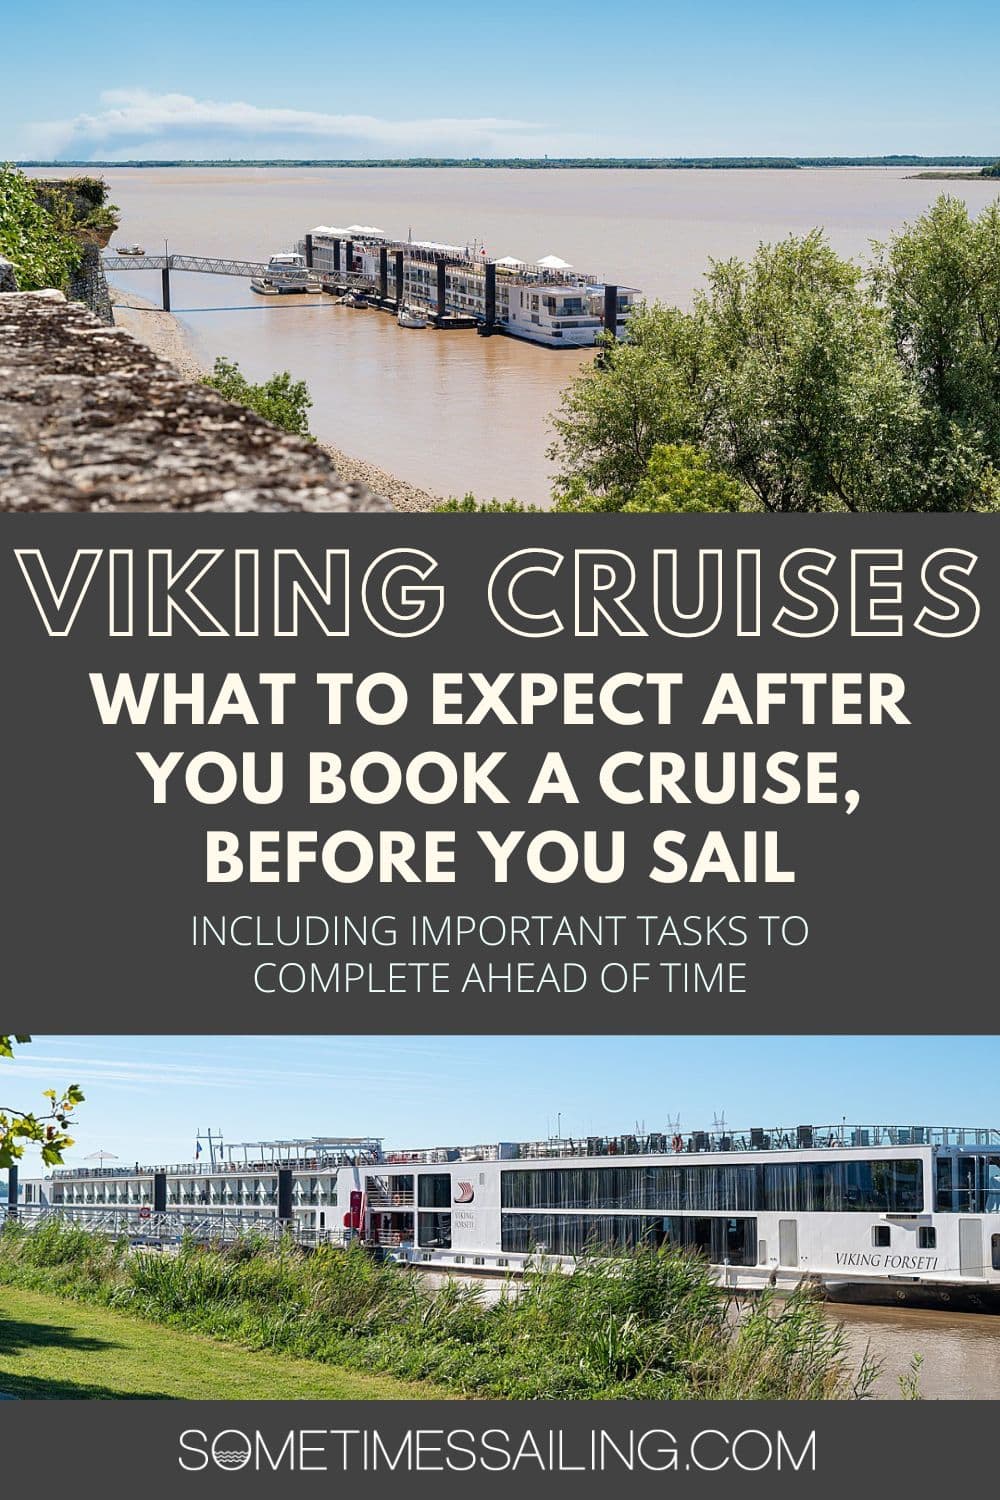 Viking Cruises: What to expect after you book a cruise, before you sail, with important tasks to complete ahead of time.